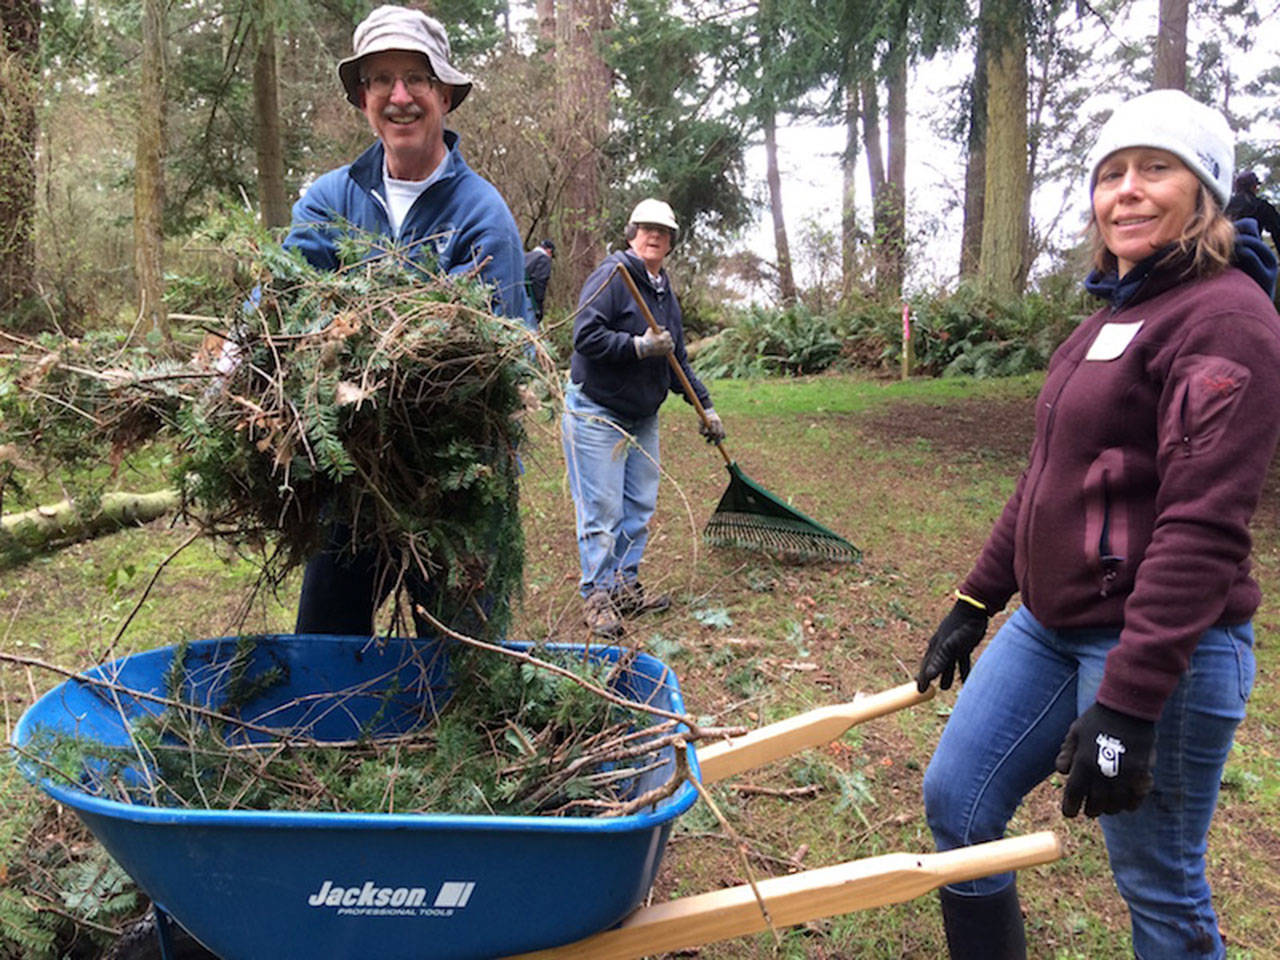 Friends of Whidbey State Parks volunteers Gary Ketcheson, left, Liz Ketcheson and Amy Bullis rake up branches at South Whidbey State Park. (Photo provided)